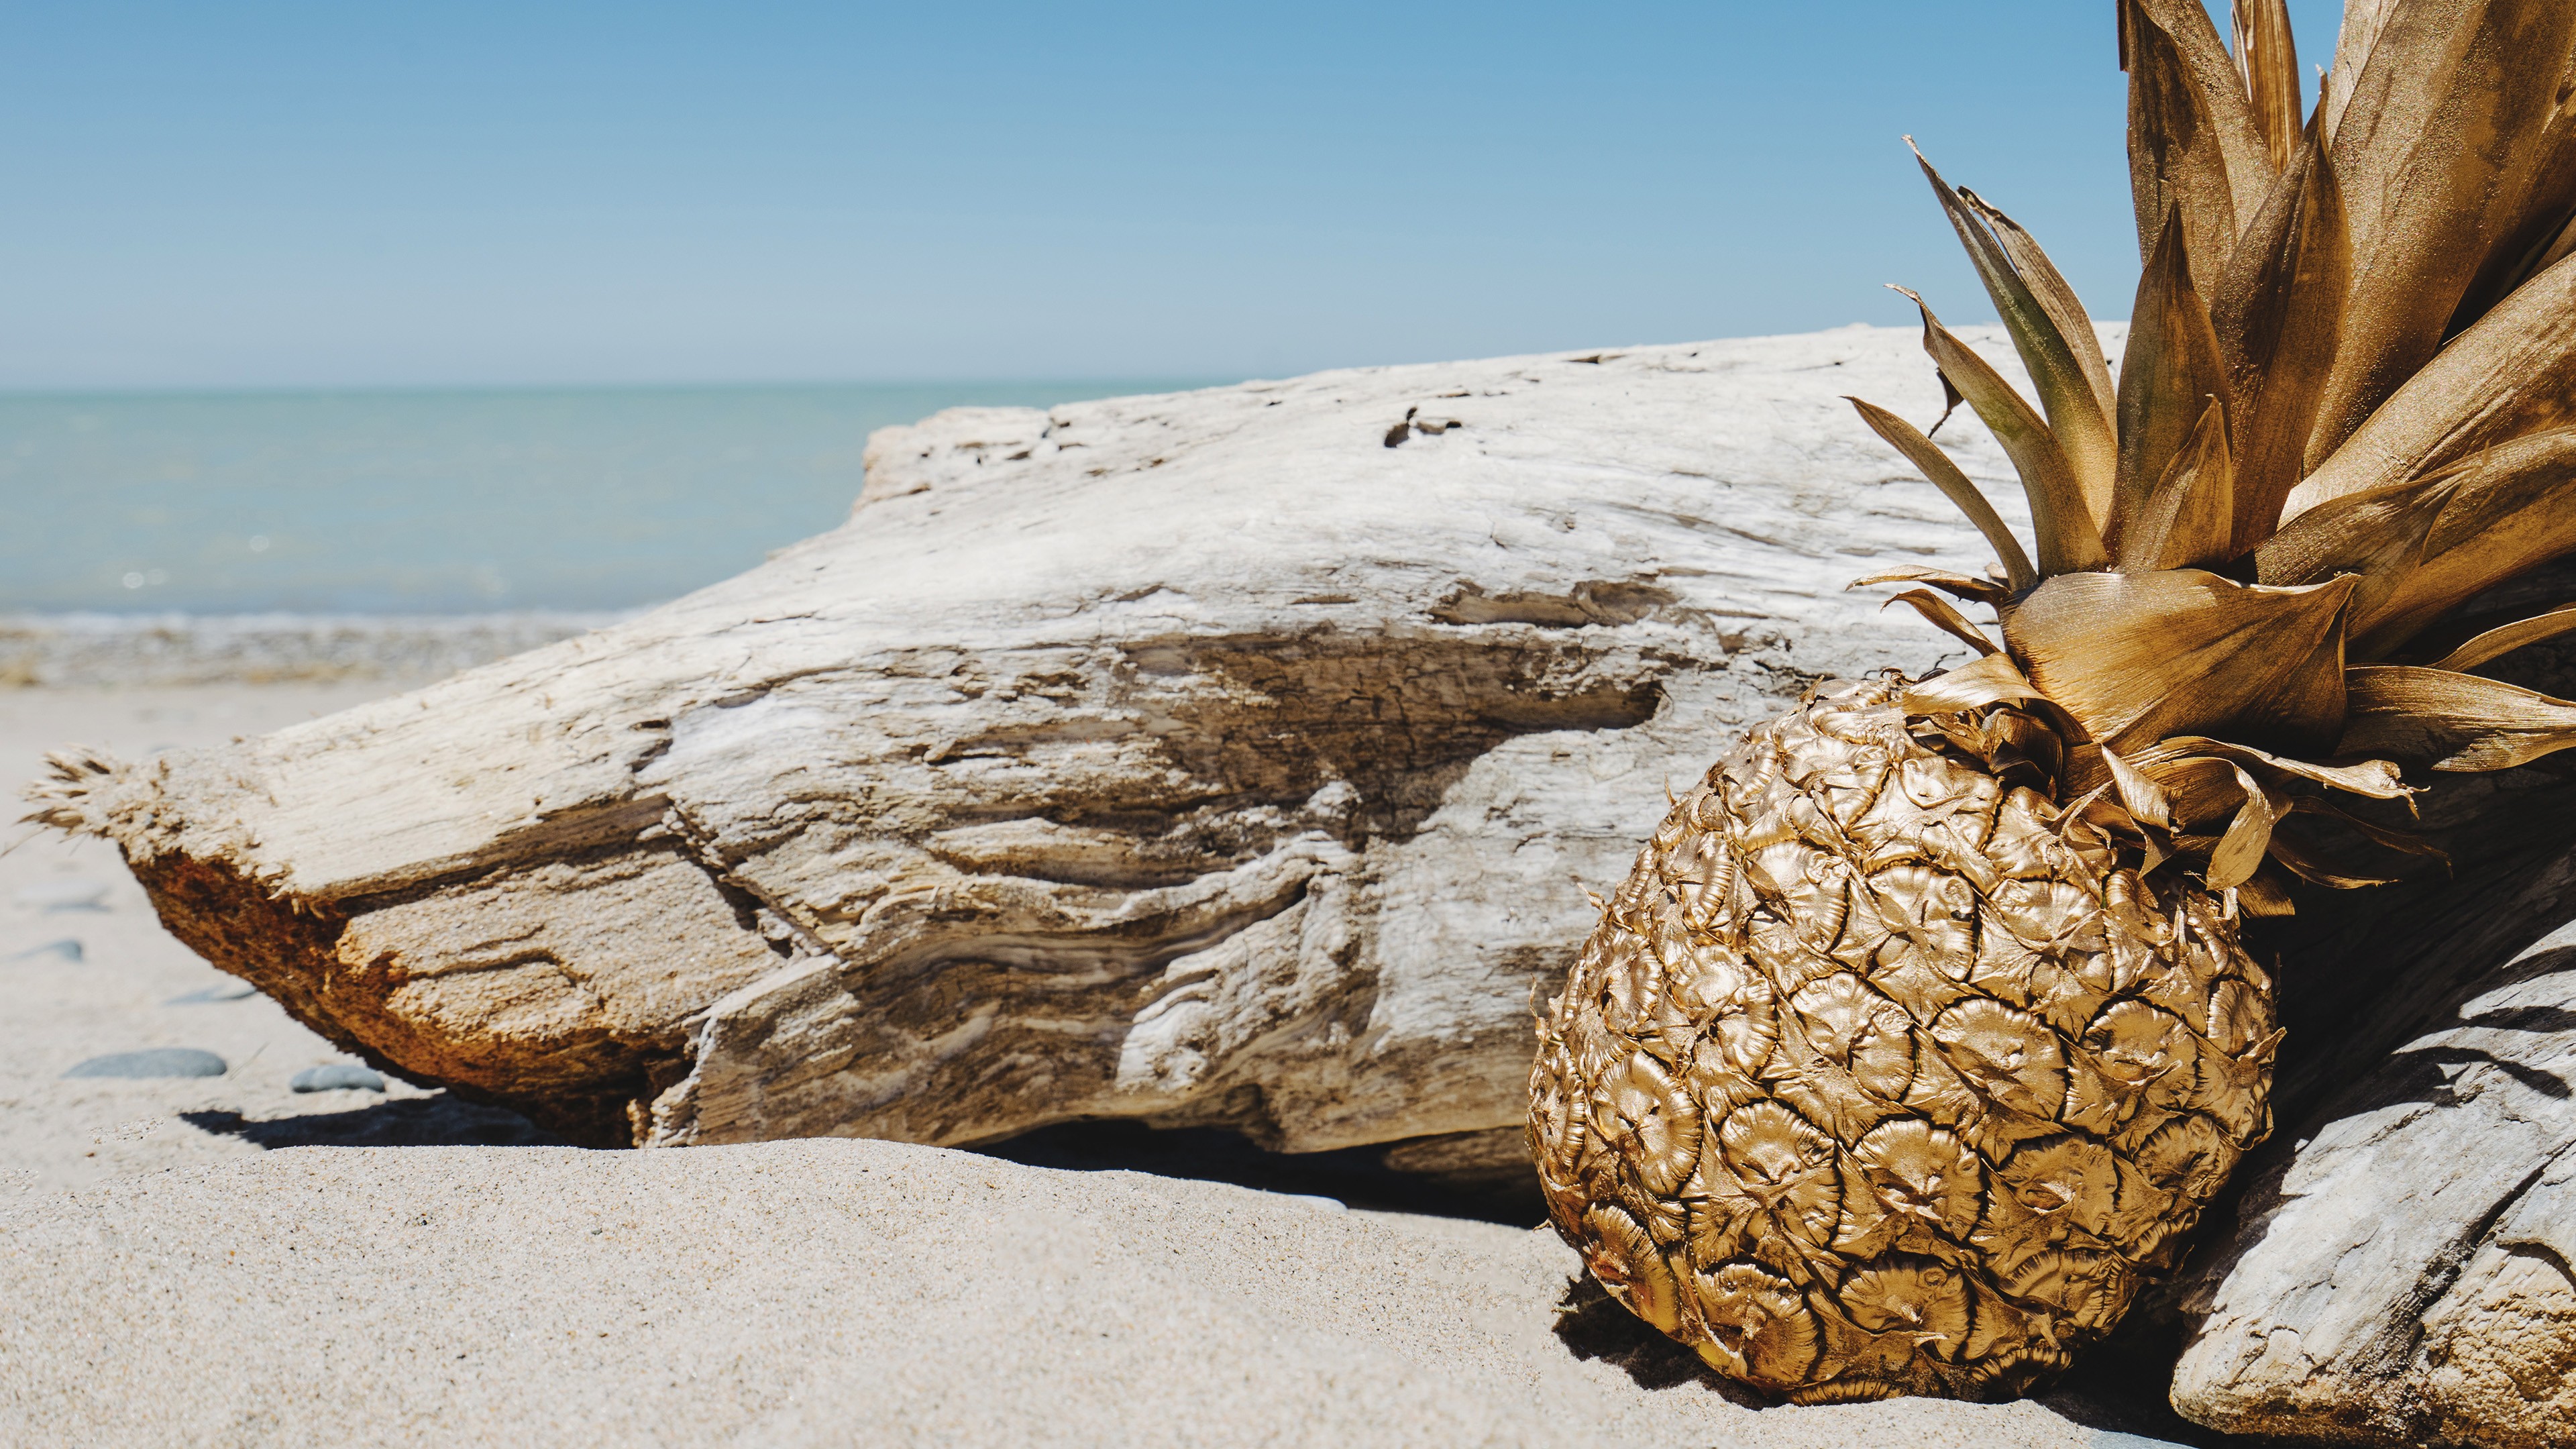 General 3840x2160 photography pineapples beach landscape